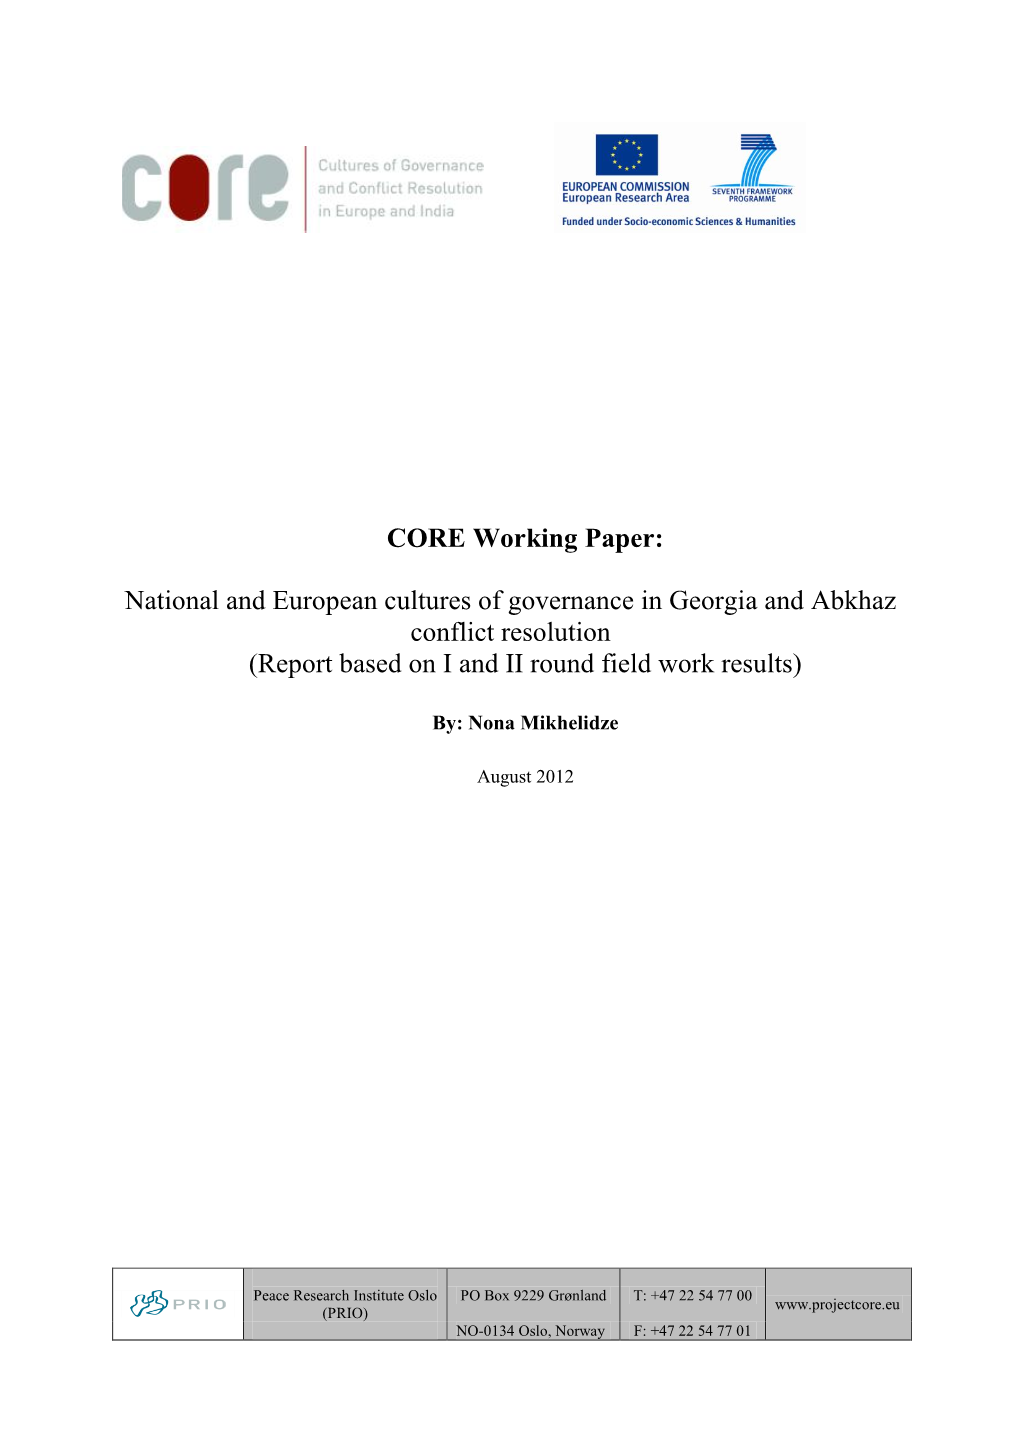 CORE Working Paper: National and European Cultures of Governance In